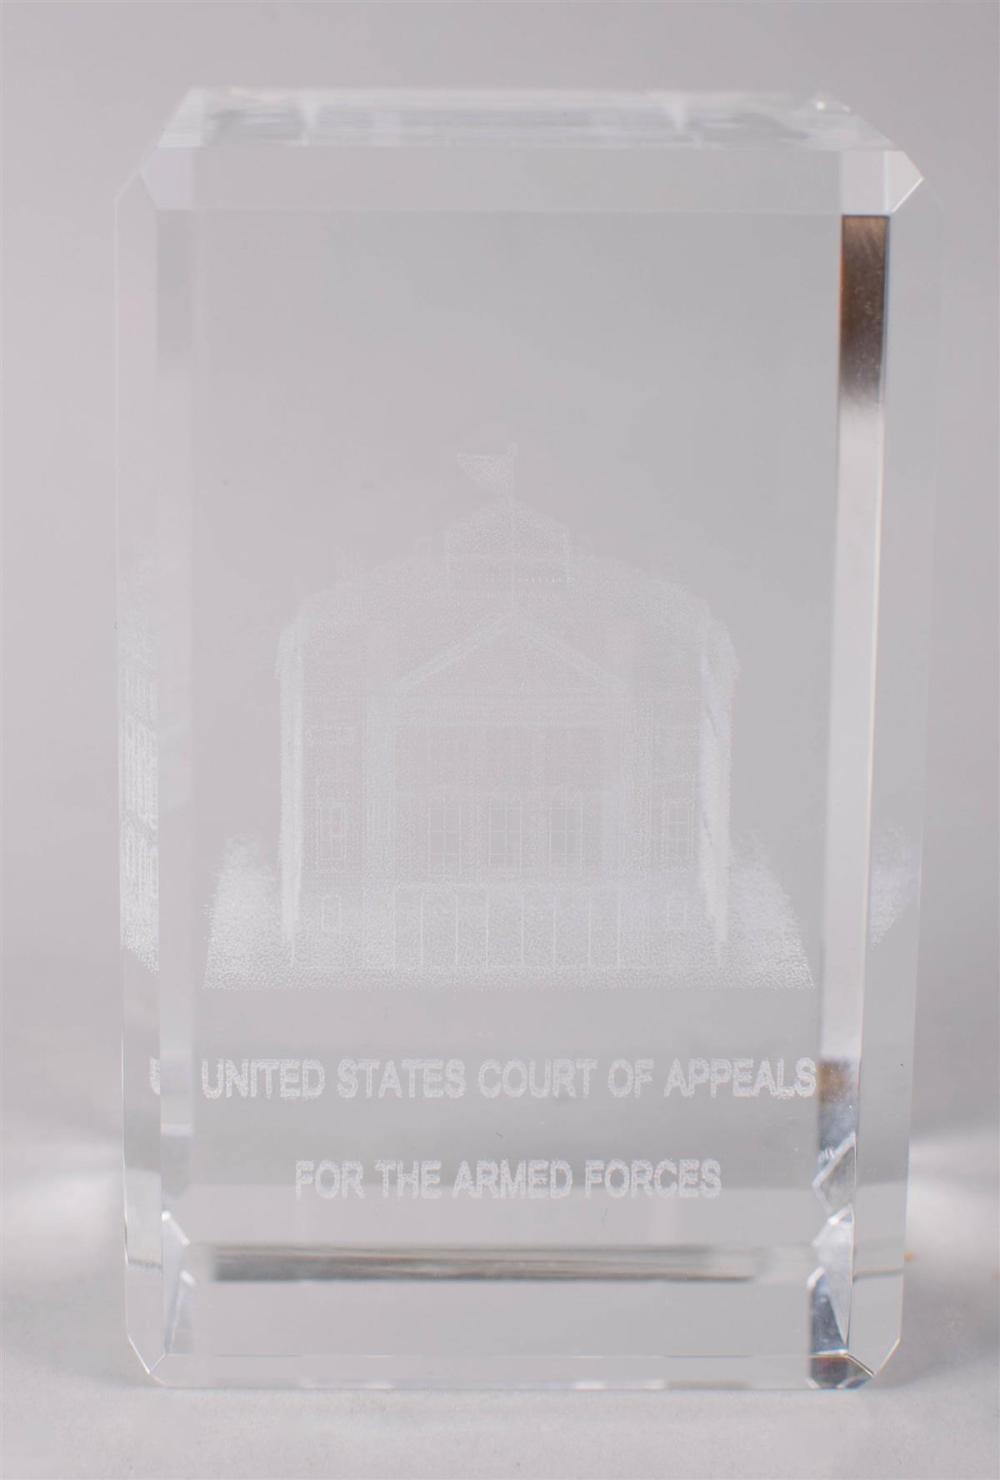 GLASS PAPERWEIGHT FROM U.S. COURT